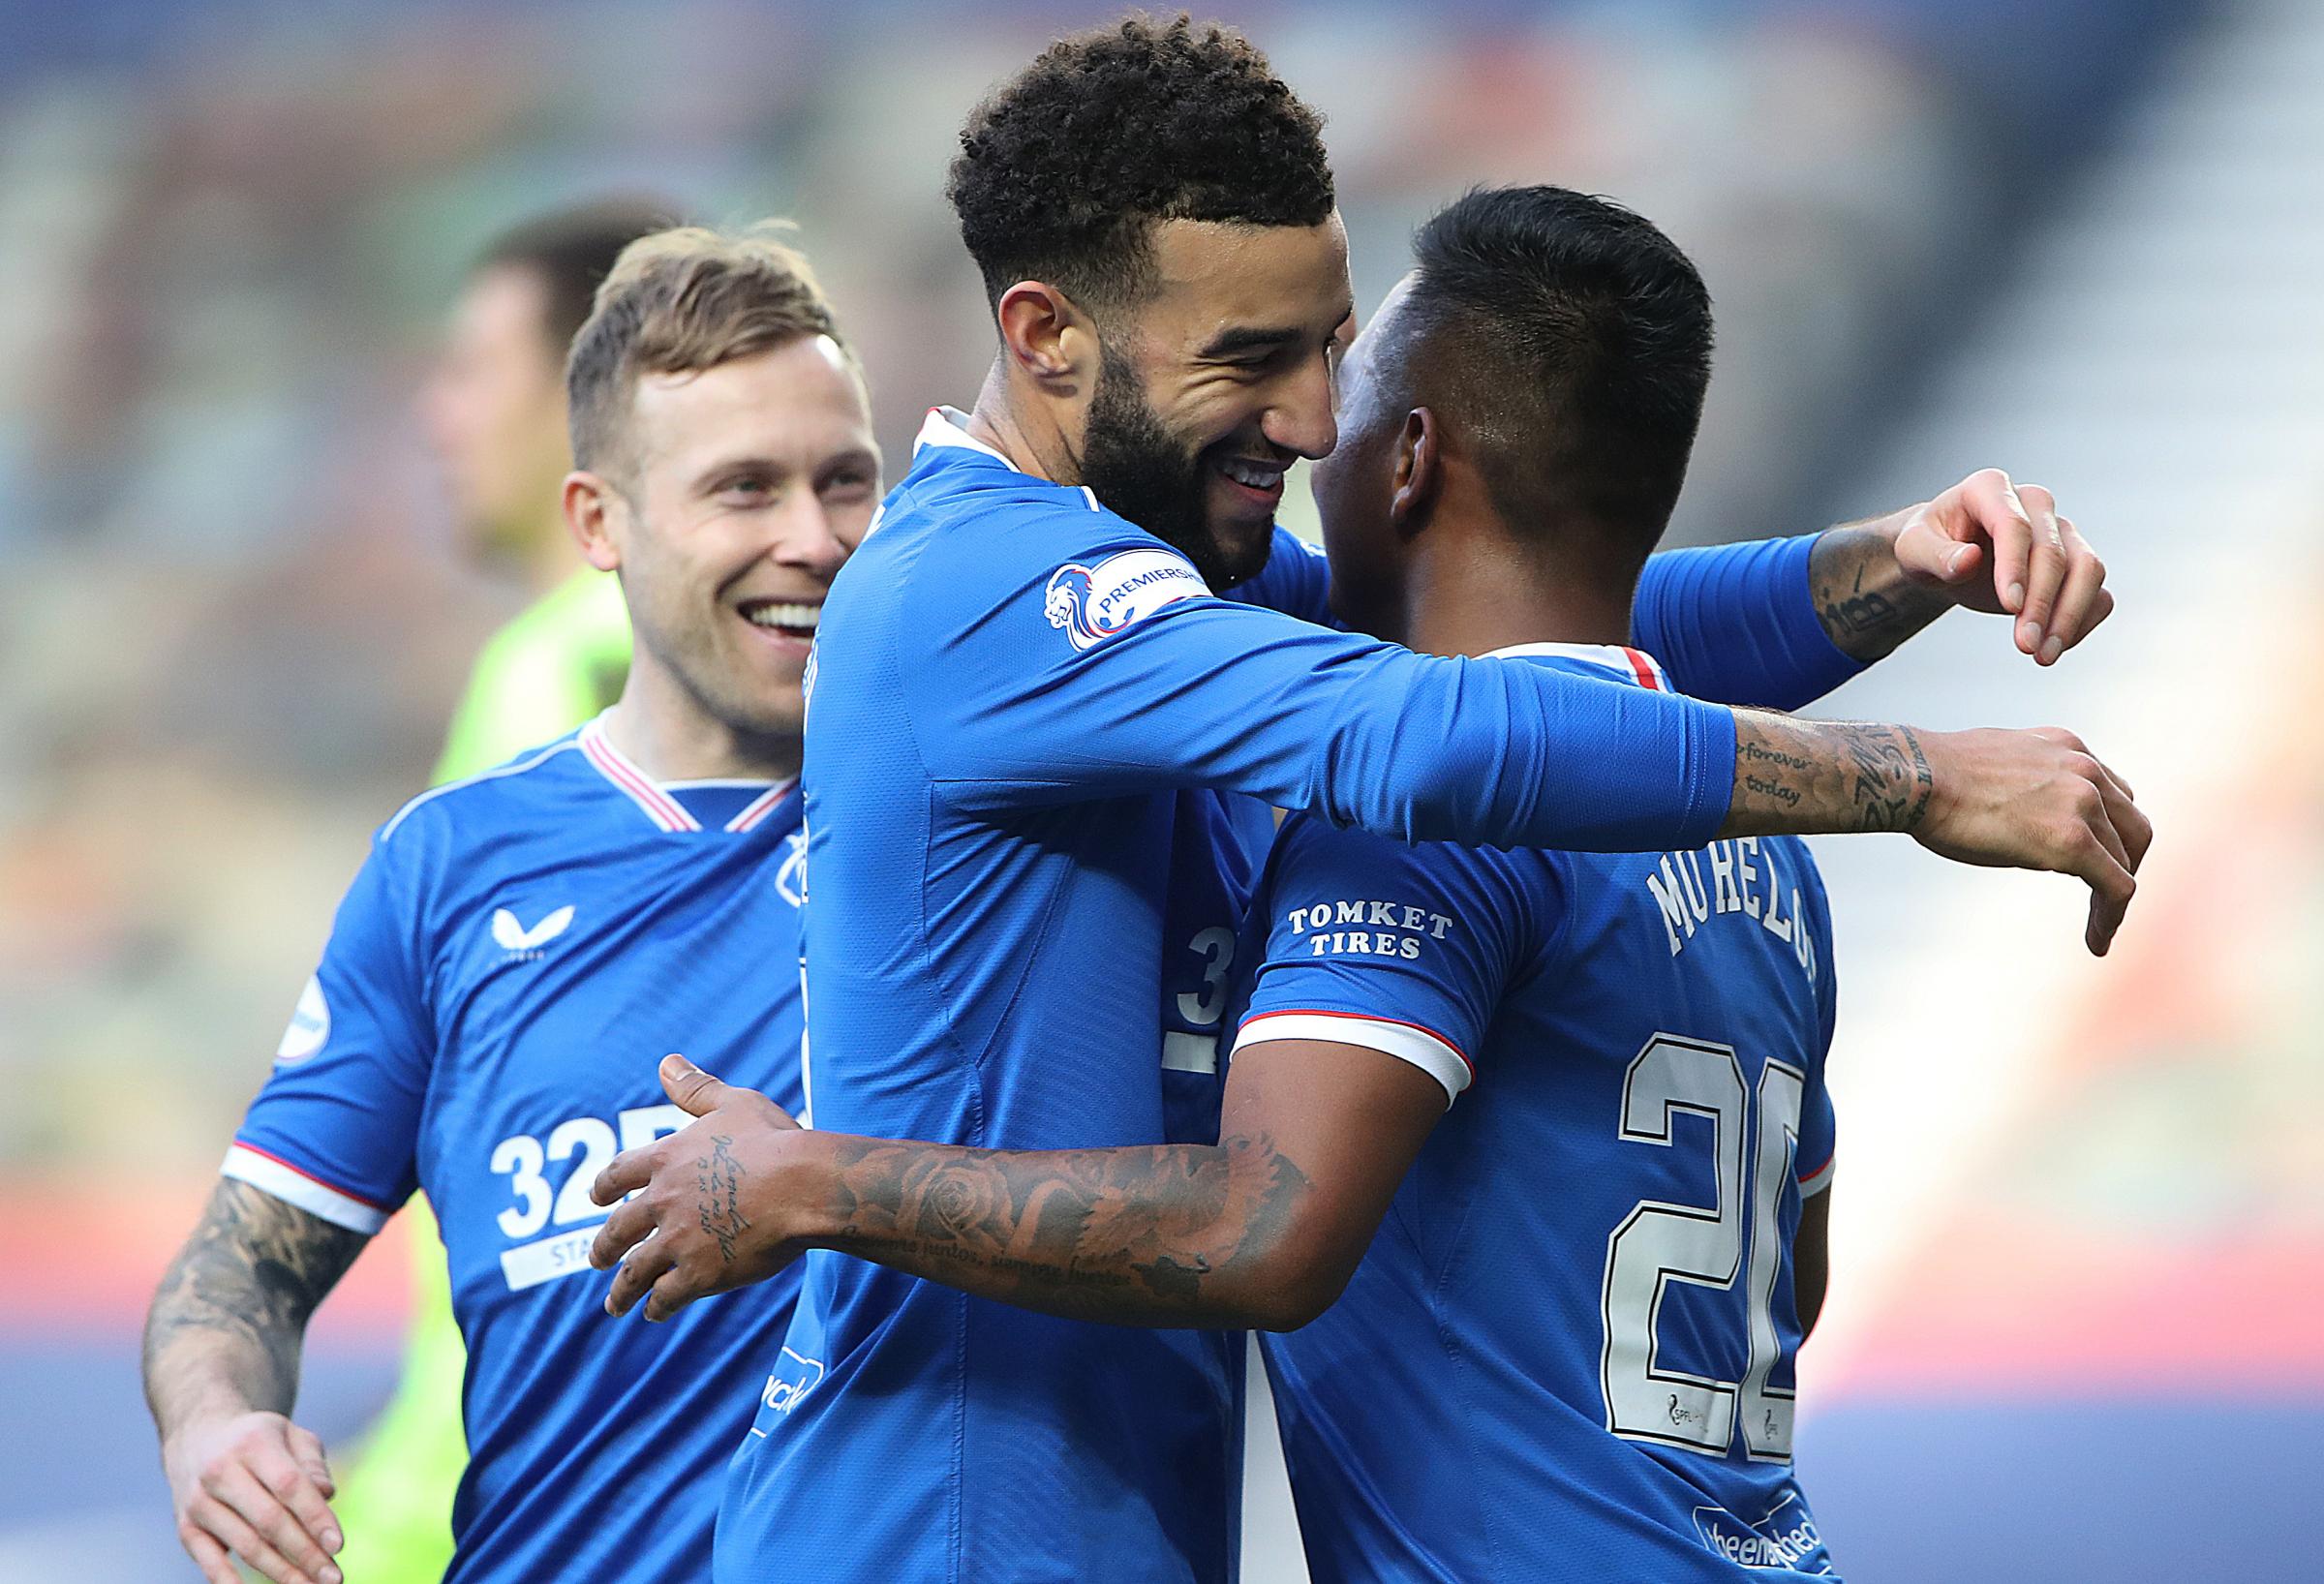 Alfredo Morelos of Rangers is congratulated by Connor Goldson of Rangers after scoring his sides fourth goal during the Ladbrokes Scottish Premier League match between Rangers and Dundee United